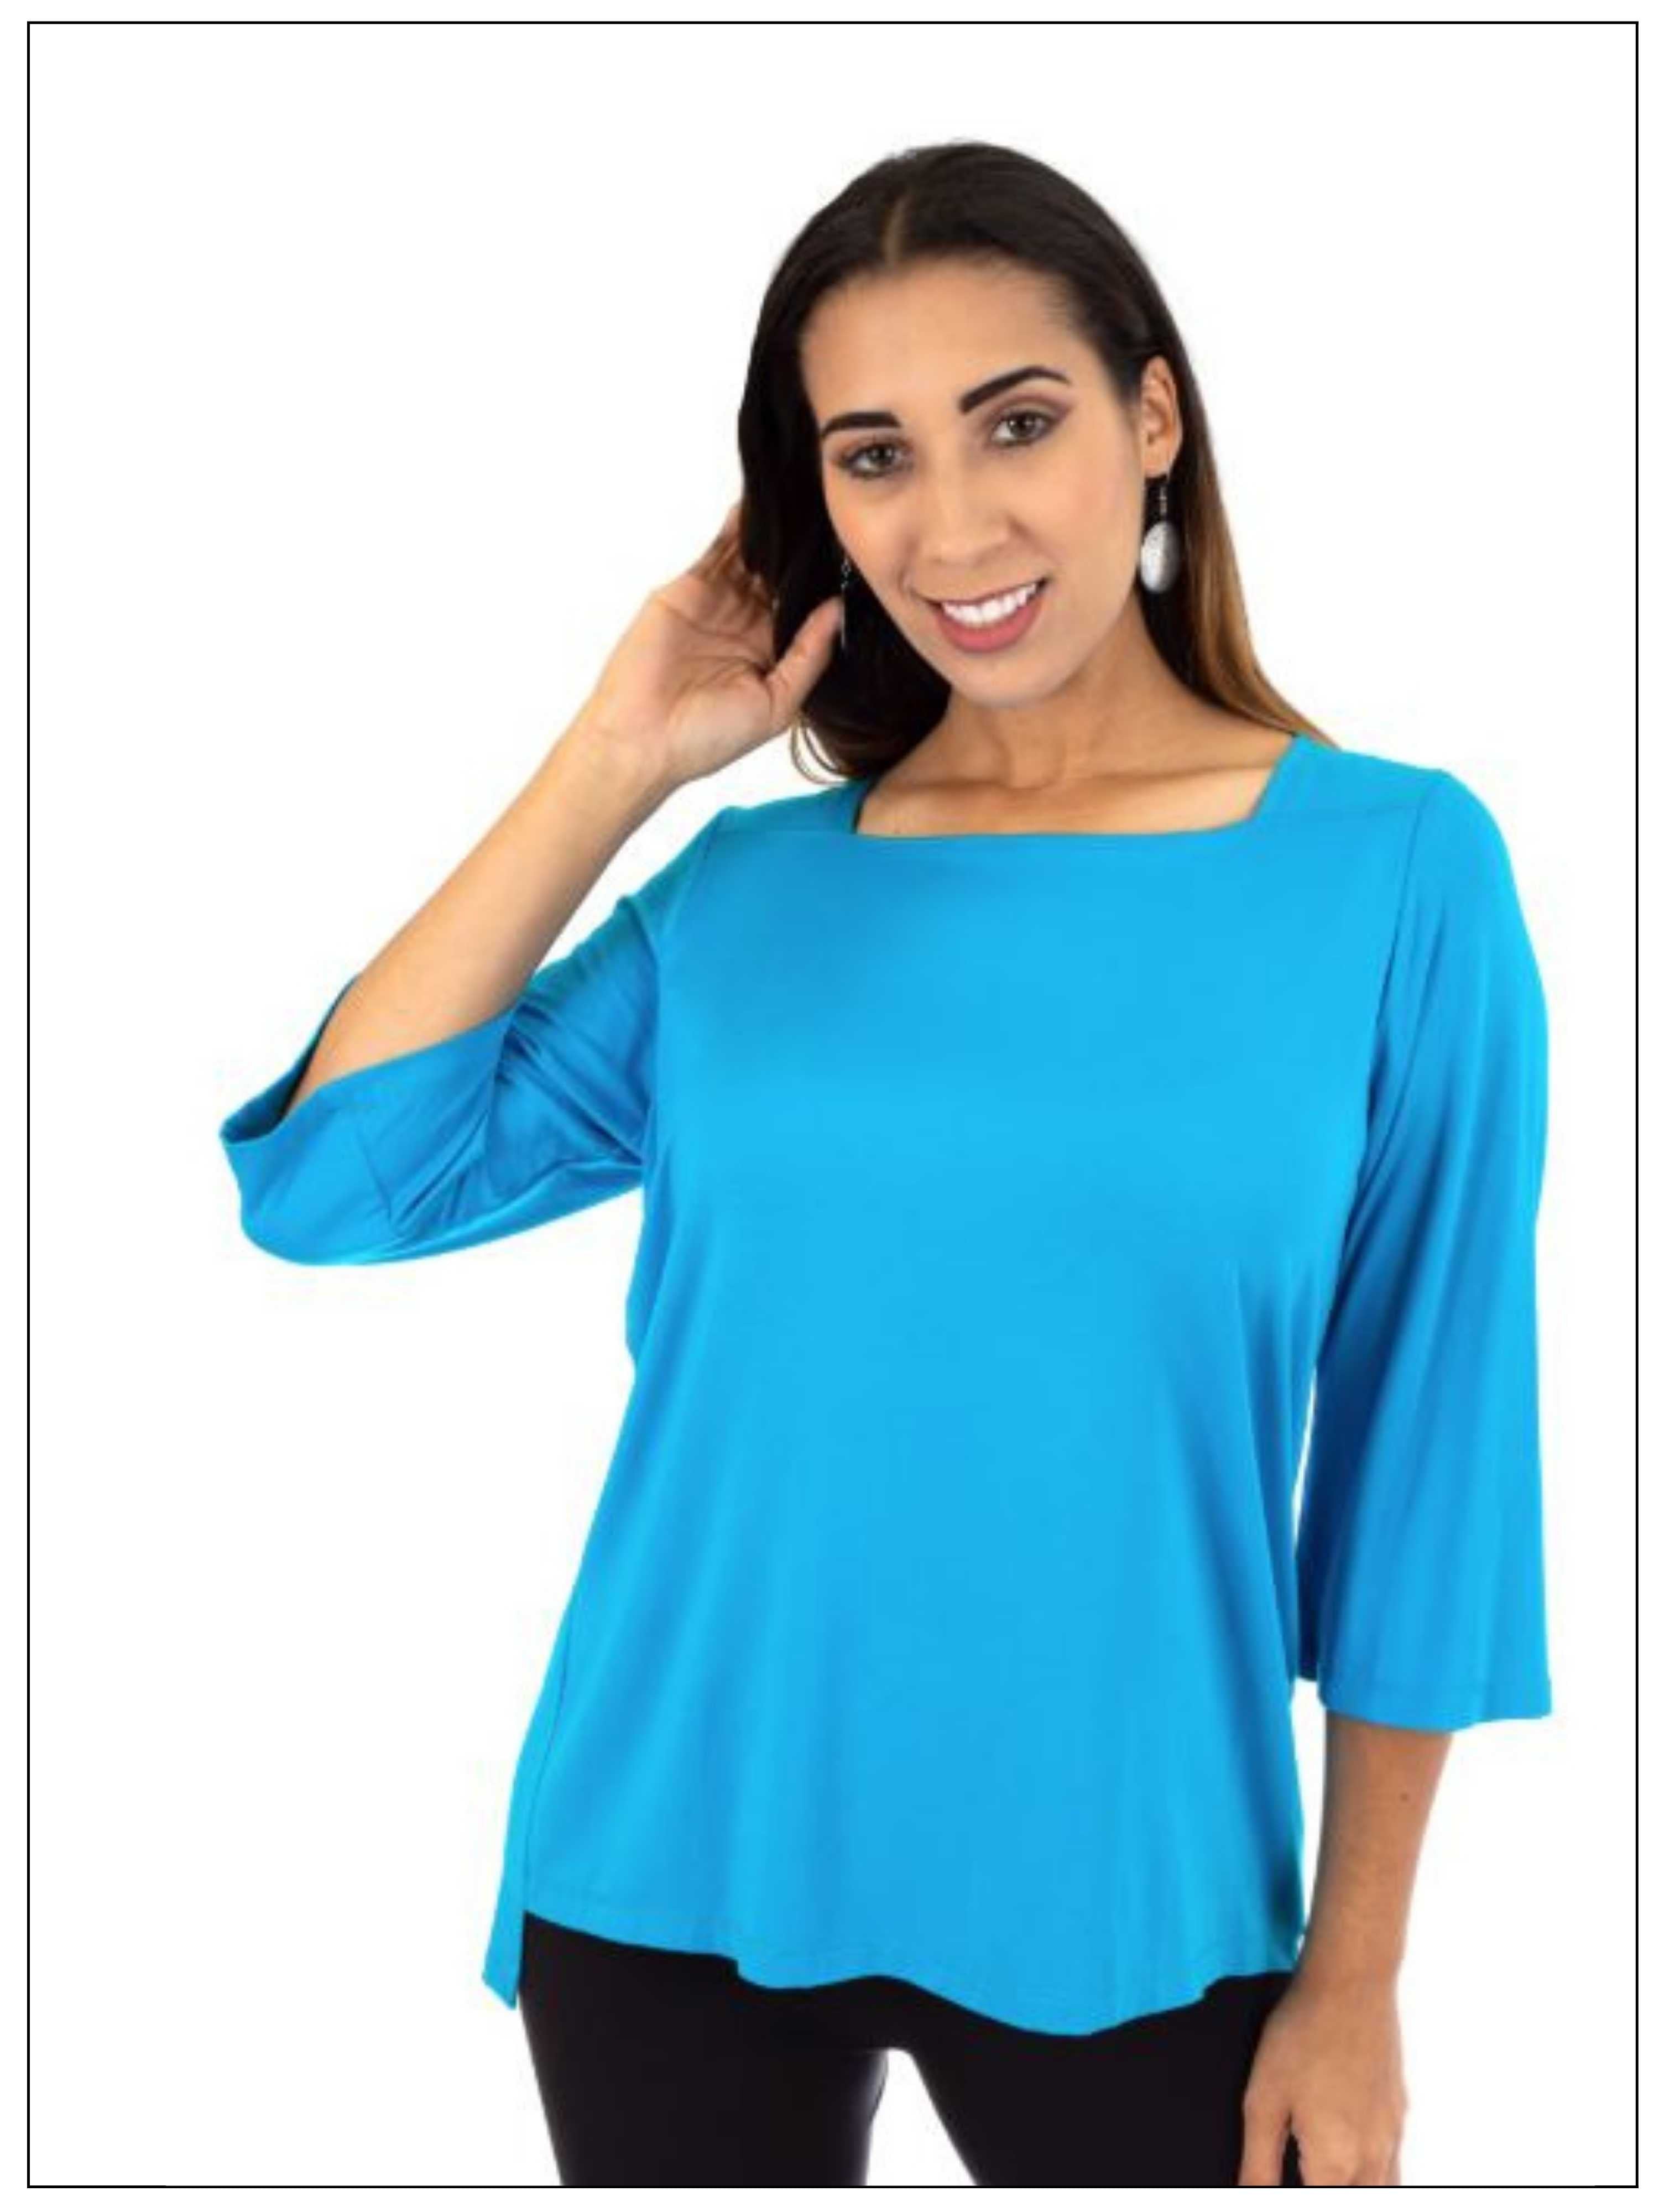 FASHQUE - Square Neck 3/4 Sleeve Top - T544 SALE